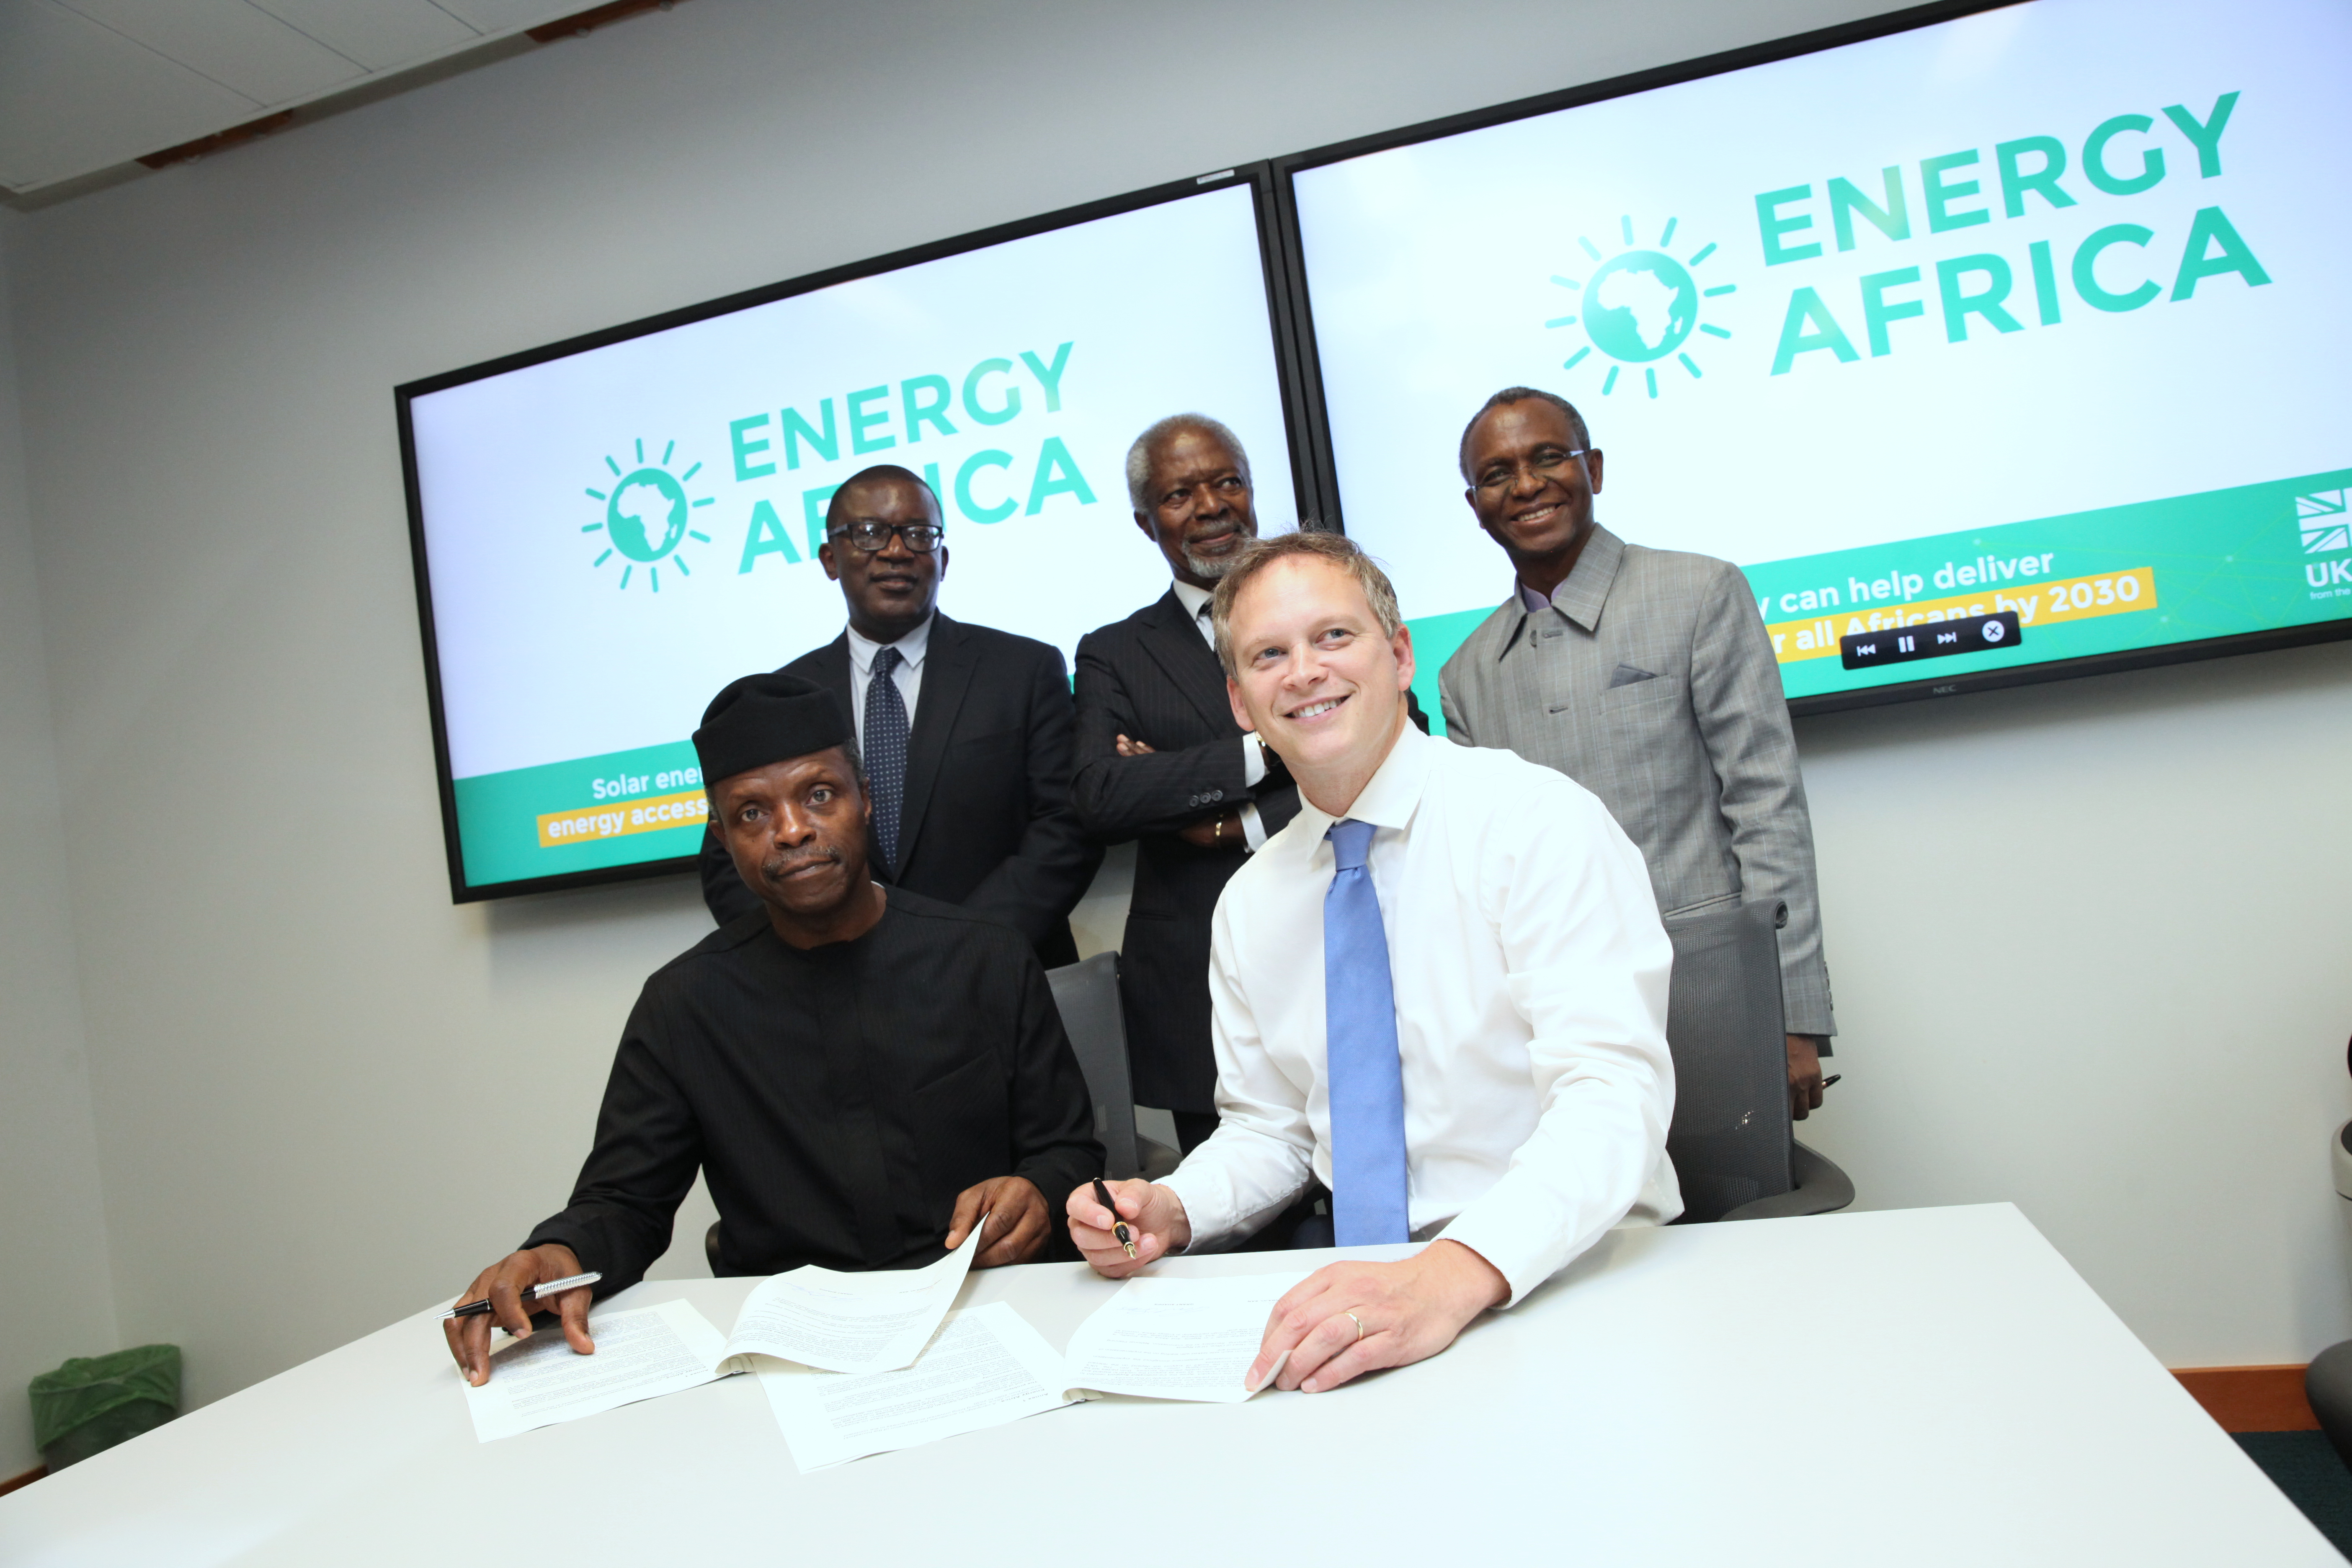 VP Osinbajo Attends Launching Of Energy Africa Campaign In London On 22/10/2015